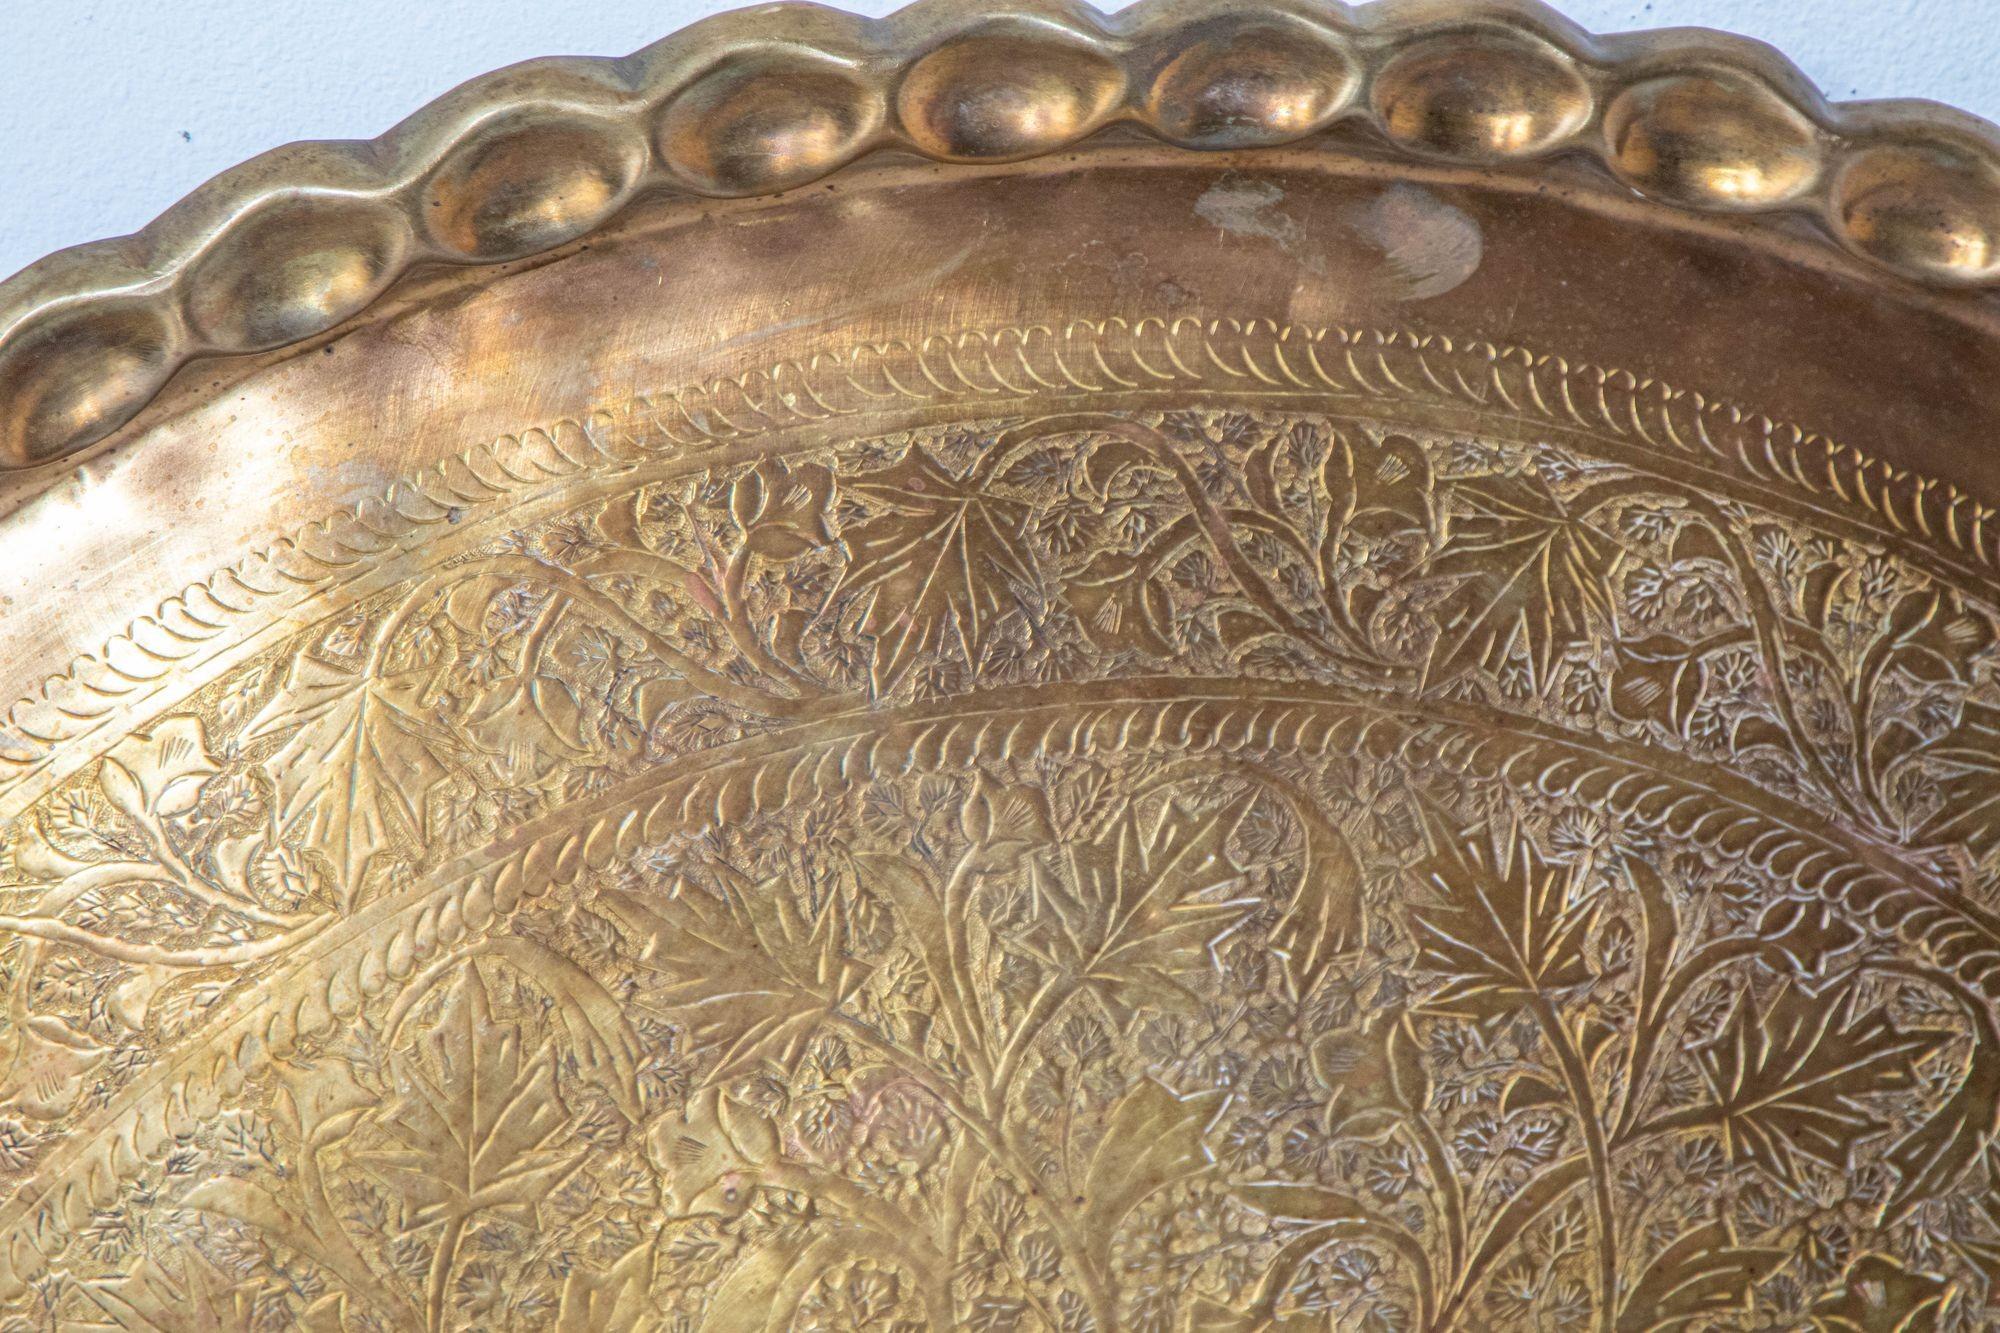 Asian Mughal Rajasthani Large Polished Round Brass Tray with Crest Edges 37 in D 1